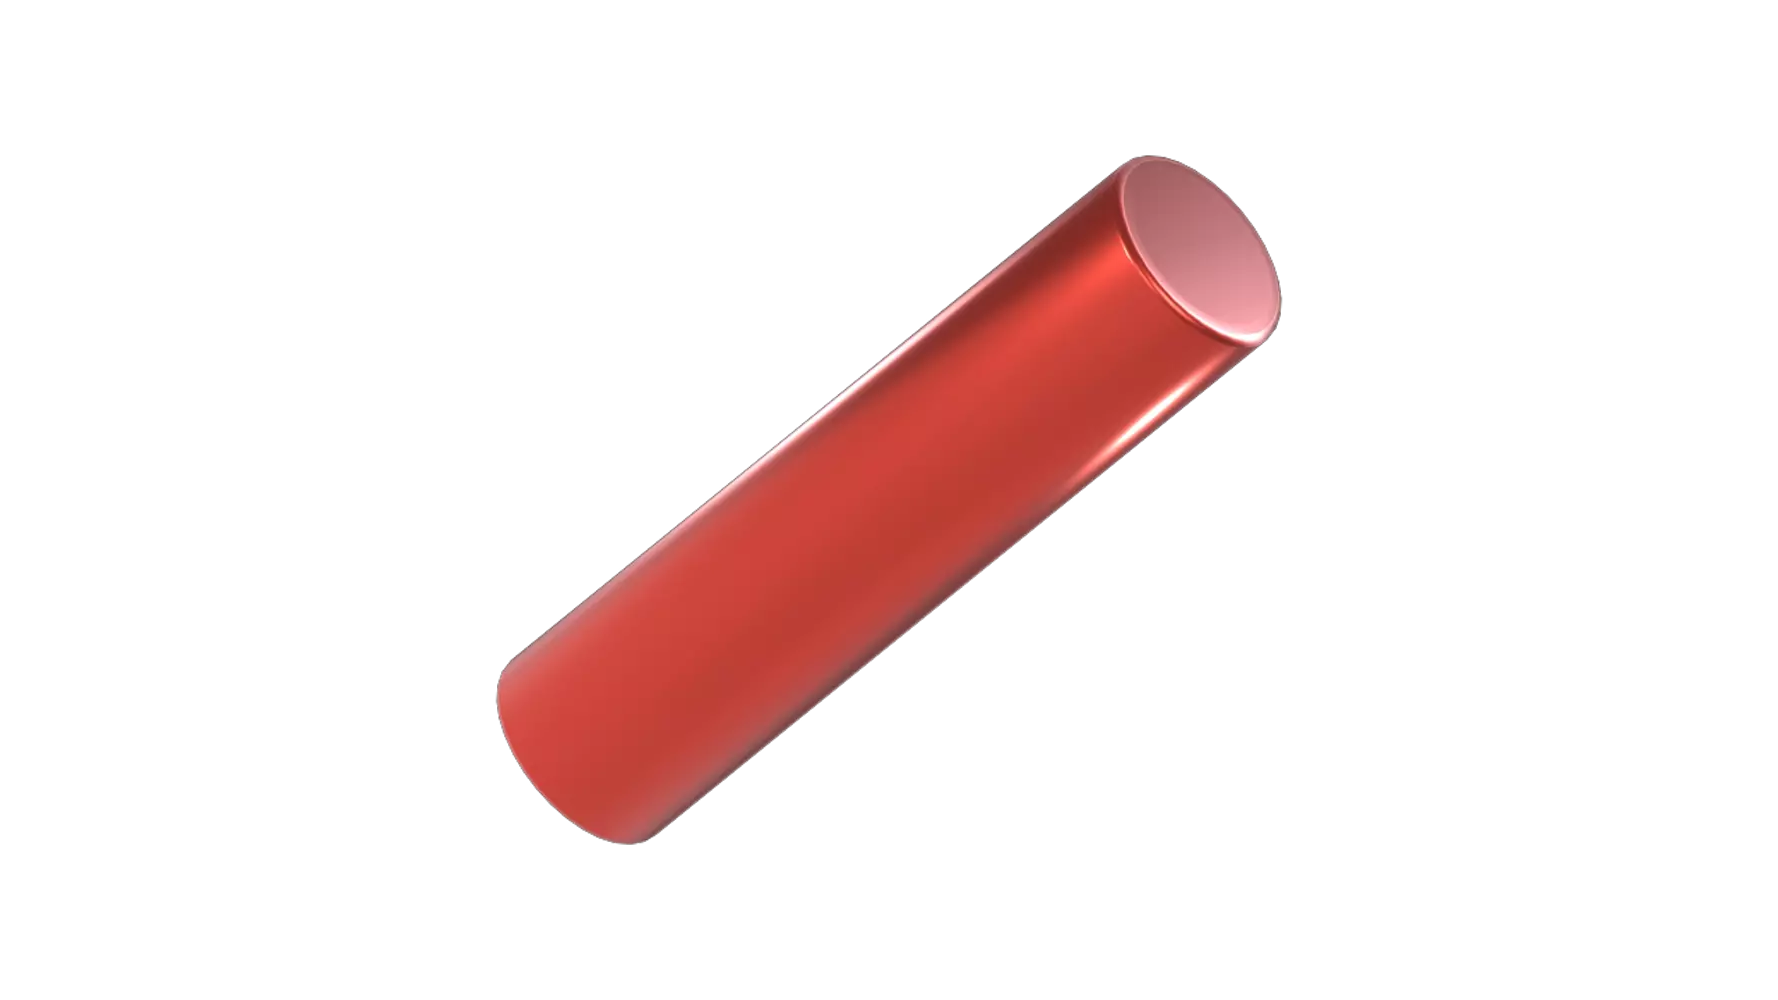 Cylinder 3D Graphic